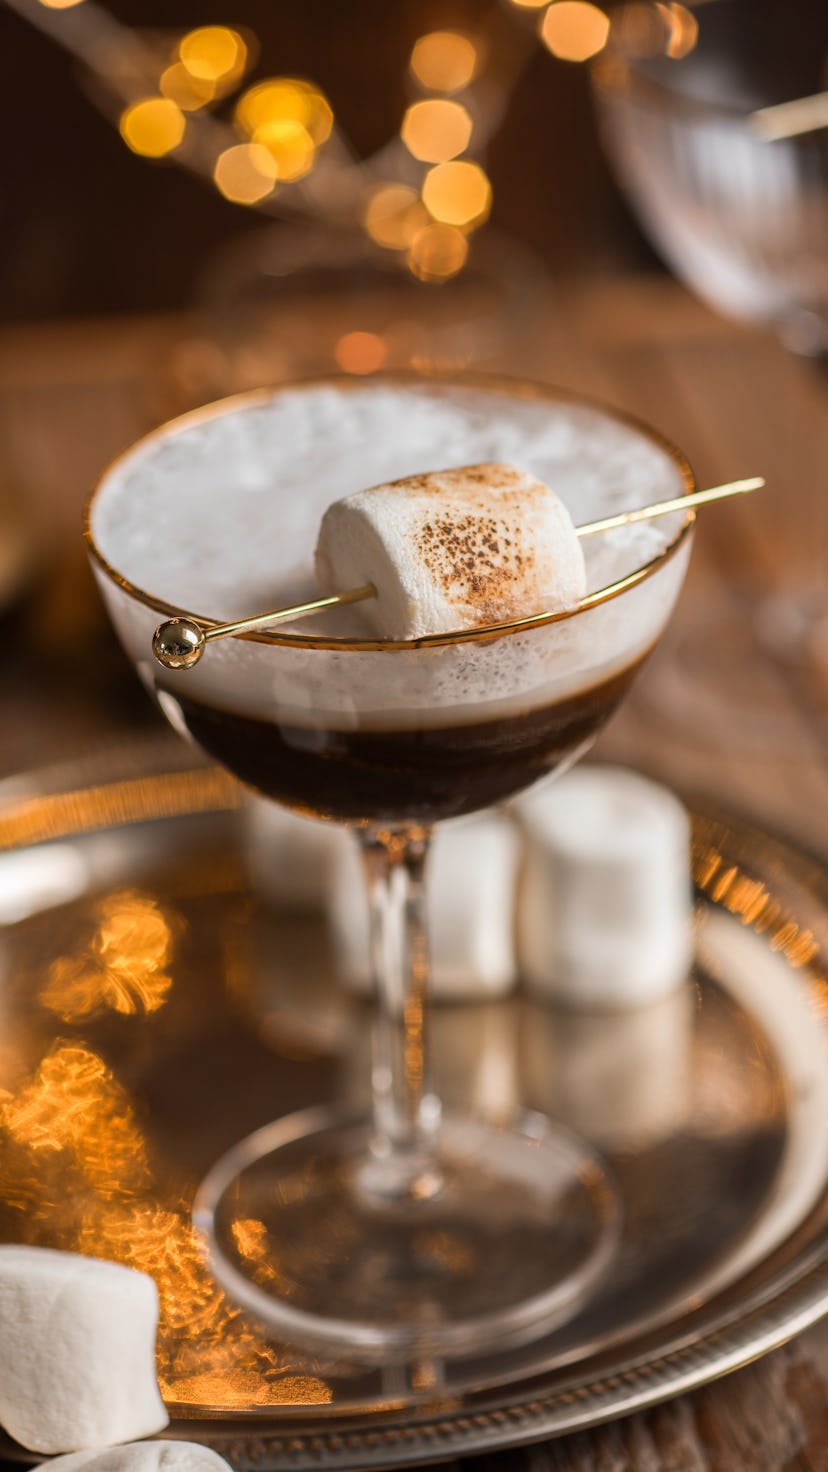 White Russian cocktail drink with Espresso and marshmallow in festive Christmas holiday scene